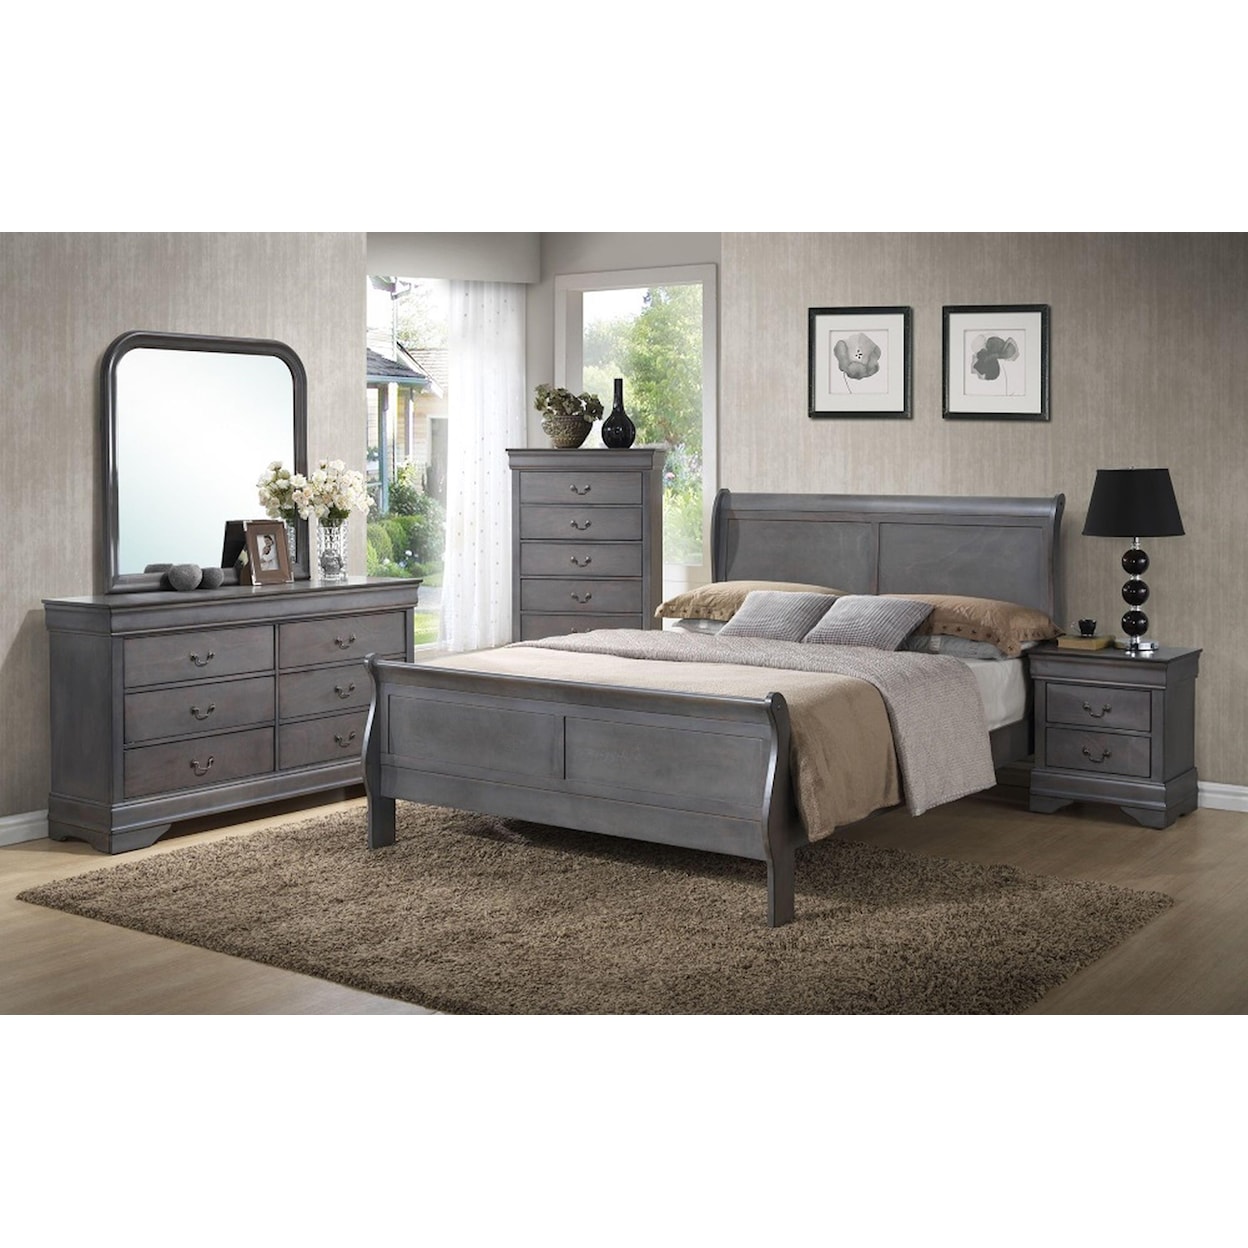 Lifestyle 5934 5 Piece Queen Bedroom Set with Chest